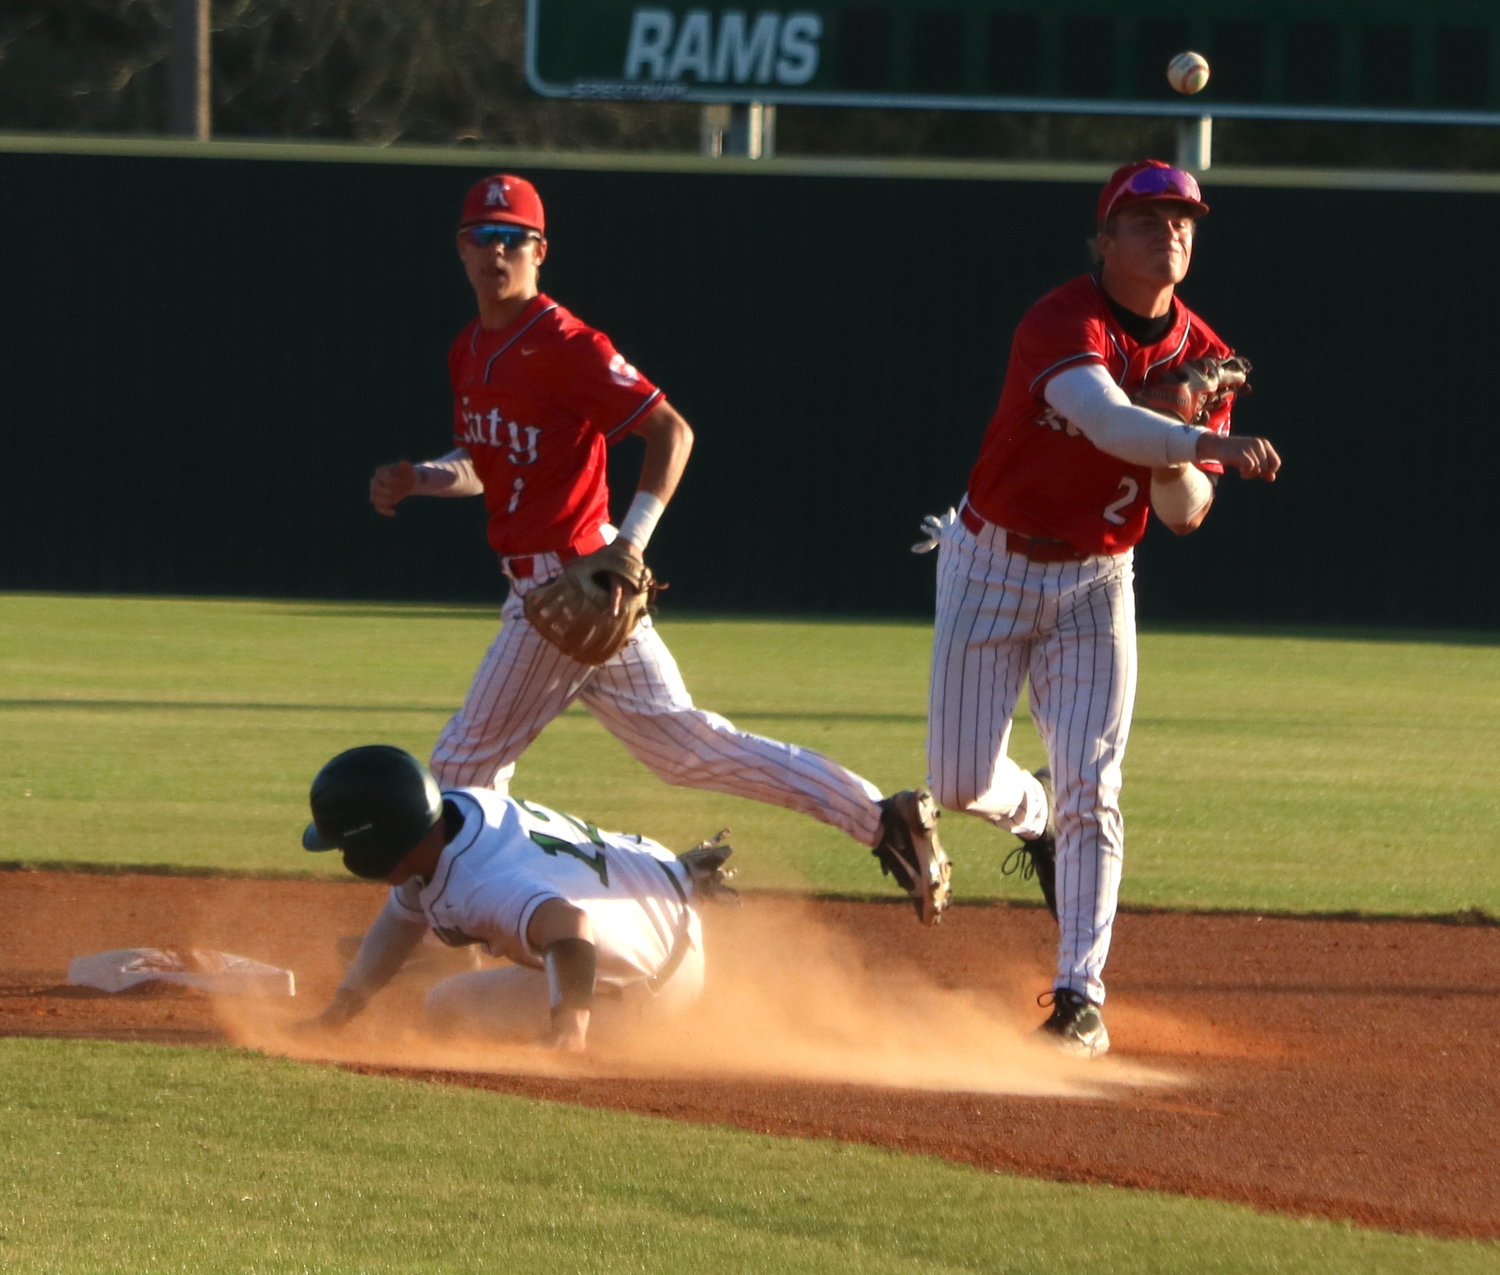 Parker Kidwell attempts to turn a double play during Tuesday’s game between Katy and Mayde Creek at the Mayde Creek baseball field.